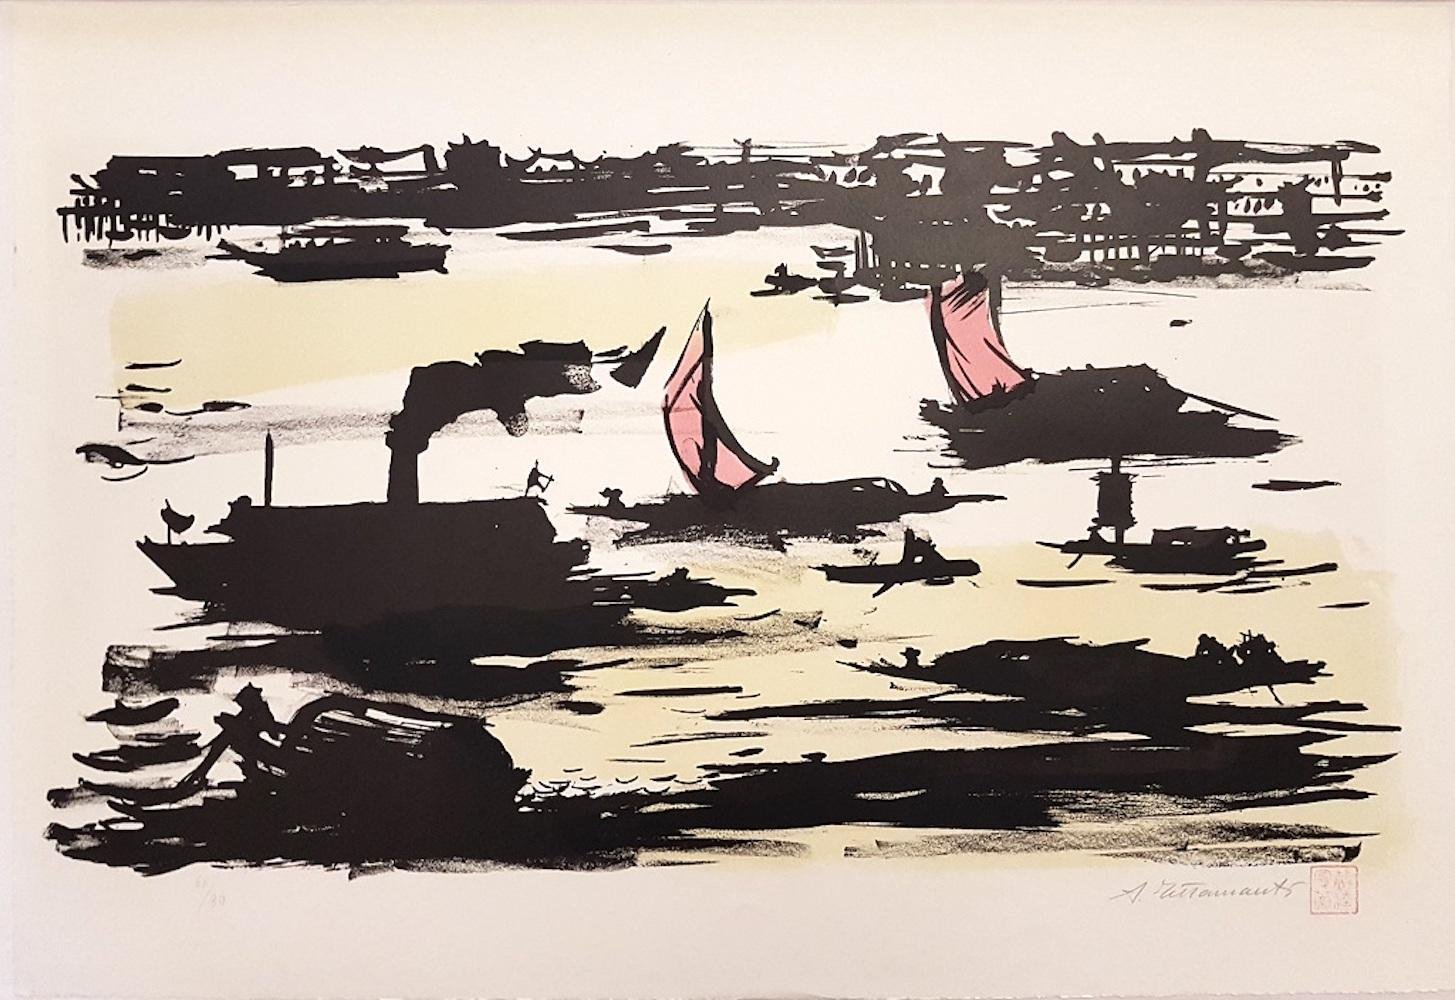 The River - Original Lithograph by Ampelio Tettamanti - 1960 1960 for ...